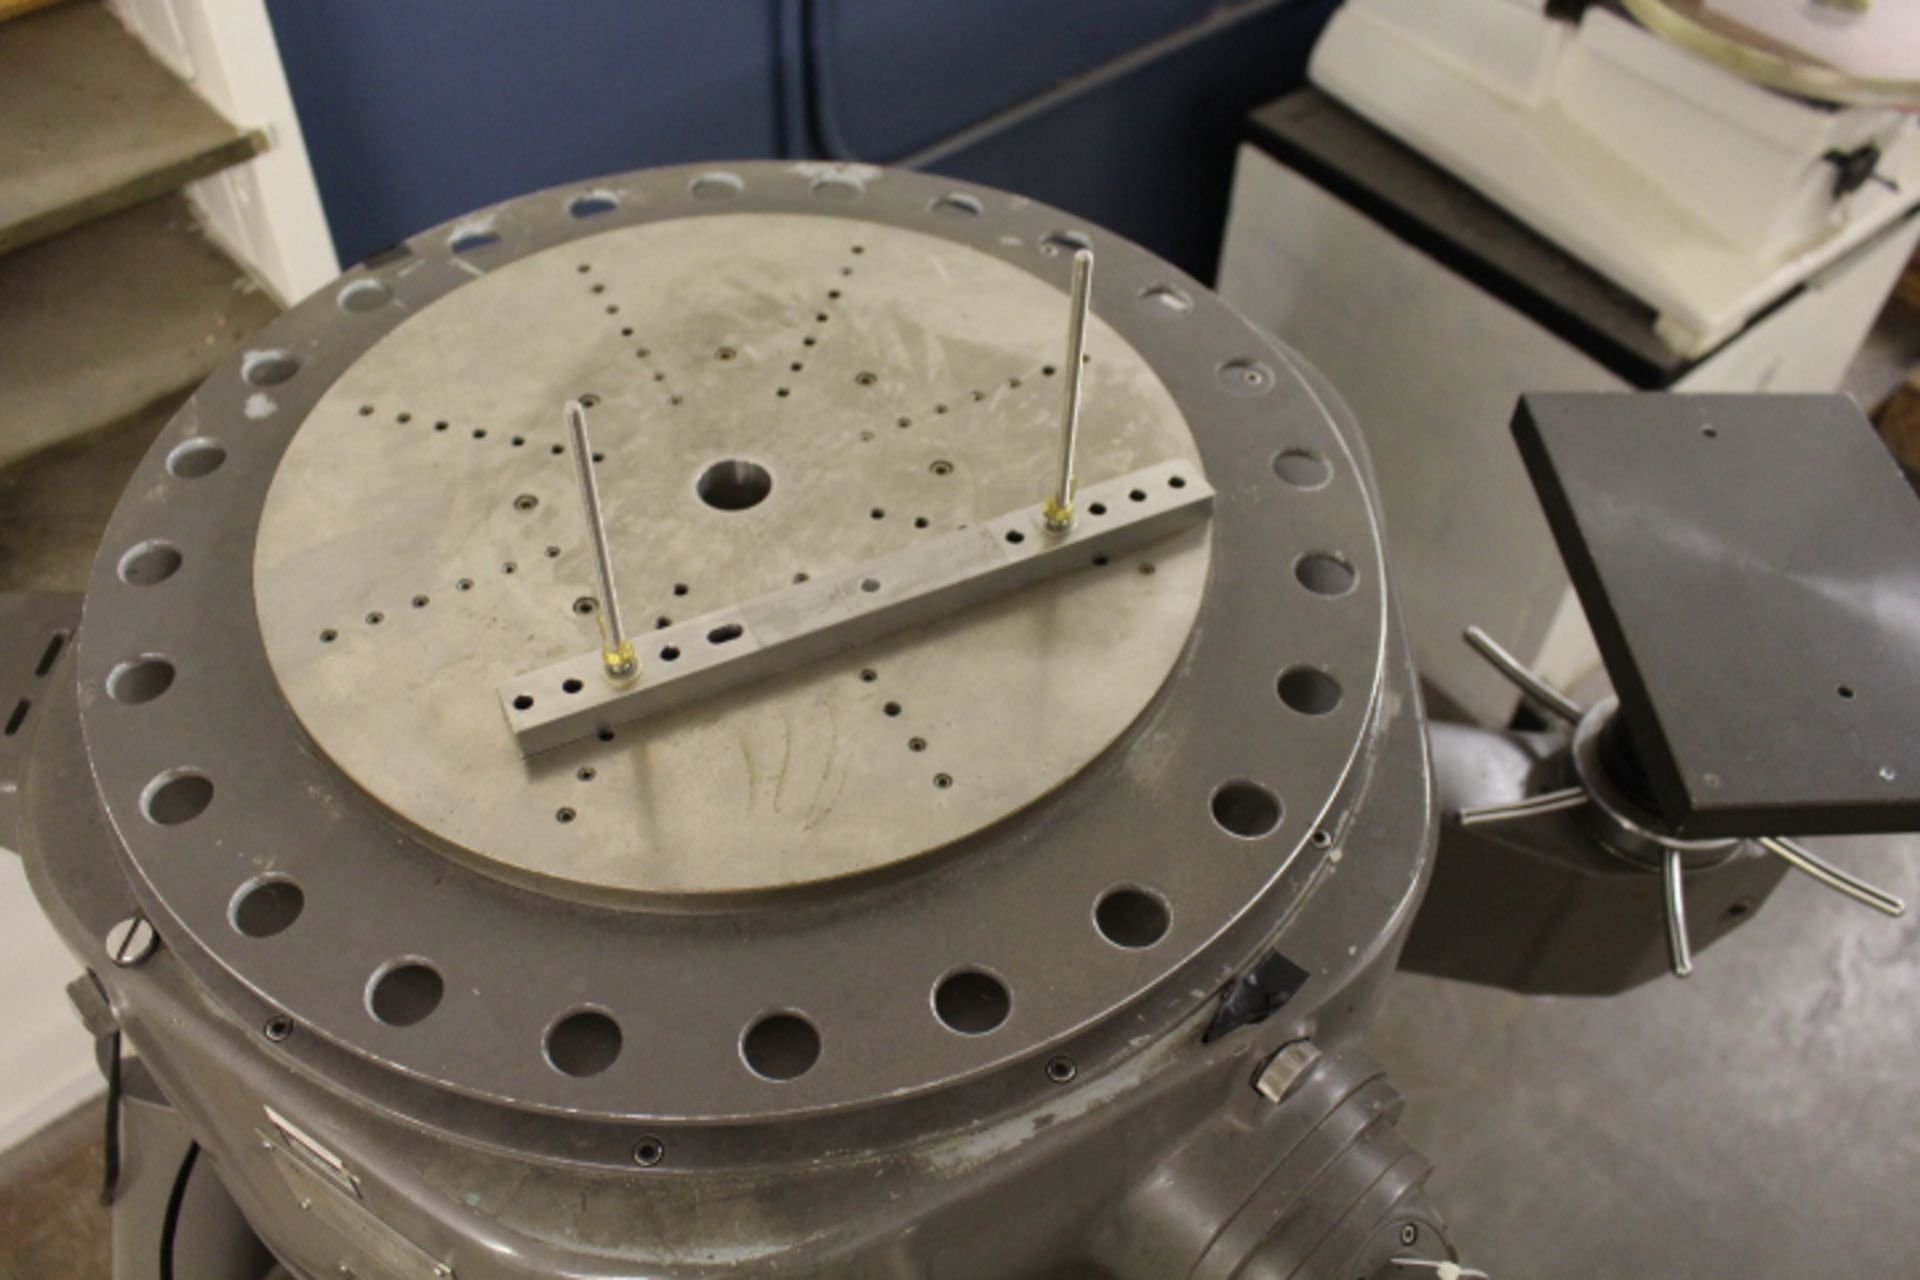 SPENTROMETER TABLE DAVIDSON, MODEL D-620, S/N 1567, WITH 16" PRECISION GROUND MOUNTING PLATE - Image 4 of 5